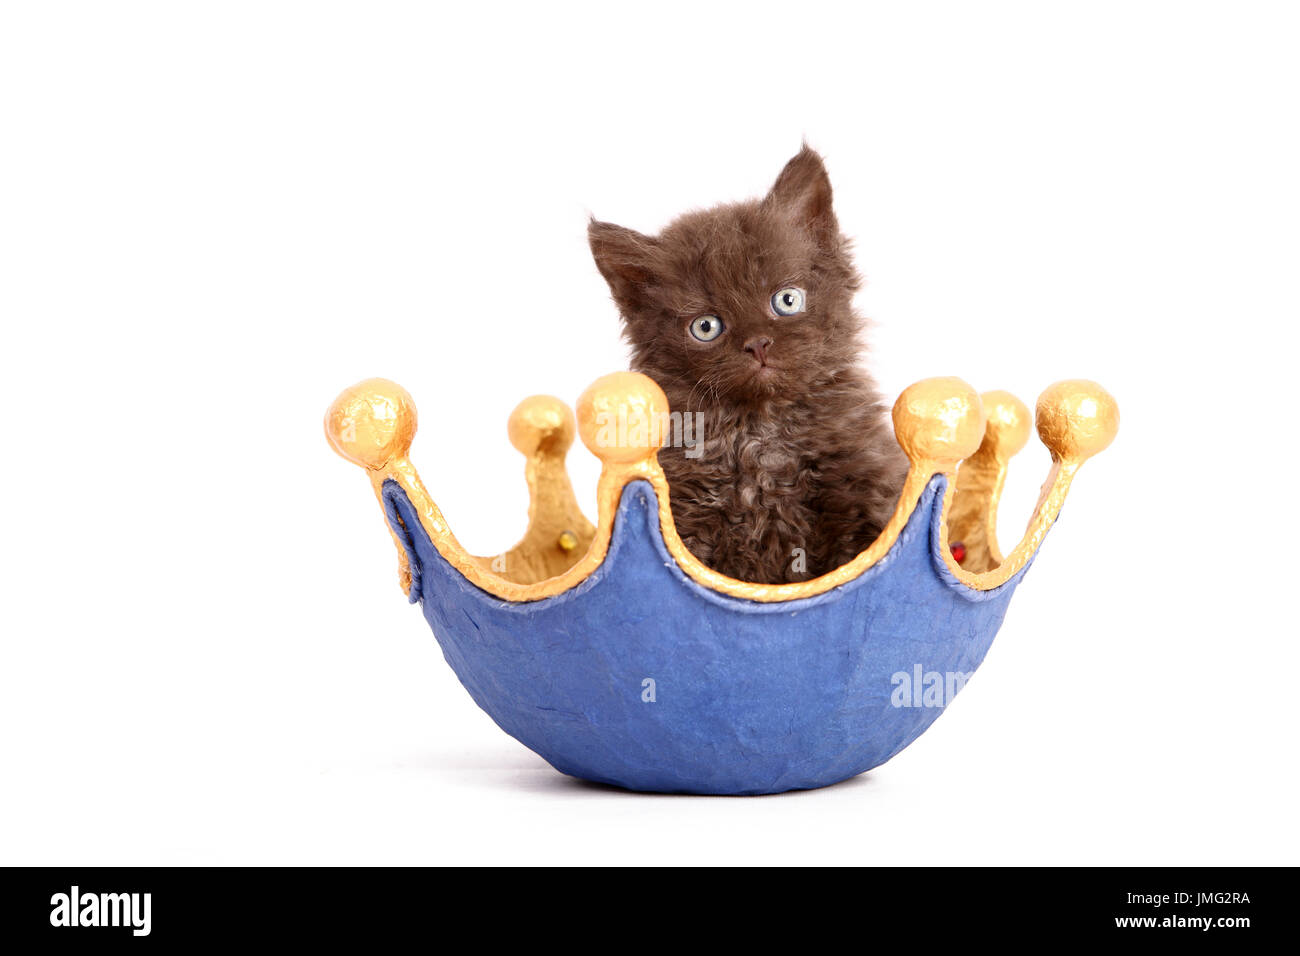 Selkirk Rex. Kitten (6 weeks old) in a dish, shaped like a crown. Studio picture against a white background. Germany Stock Photo